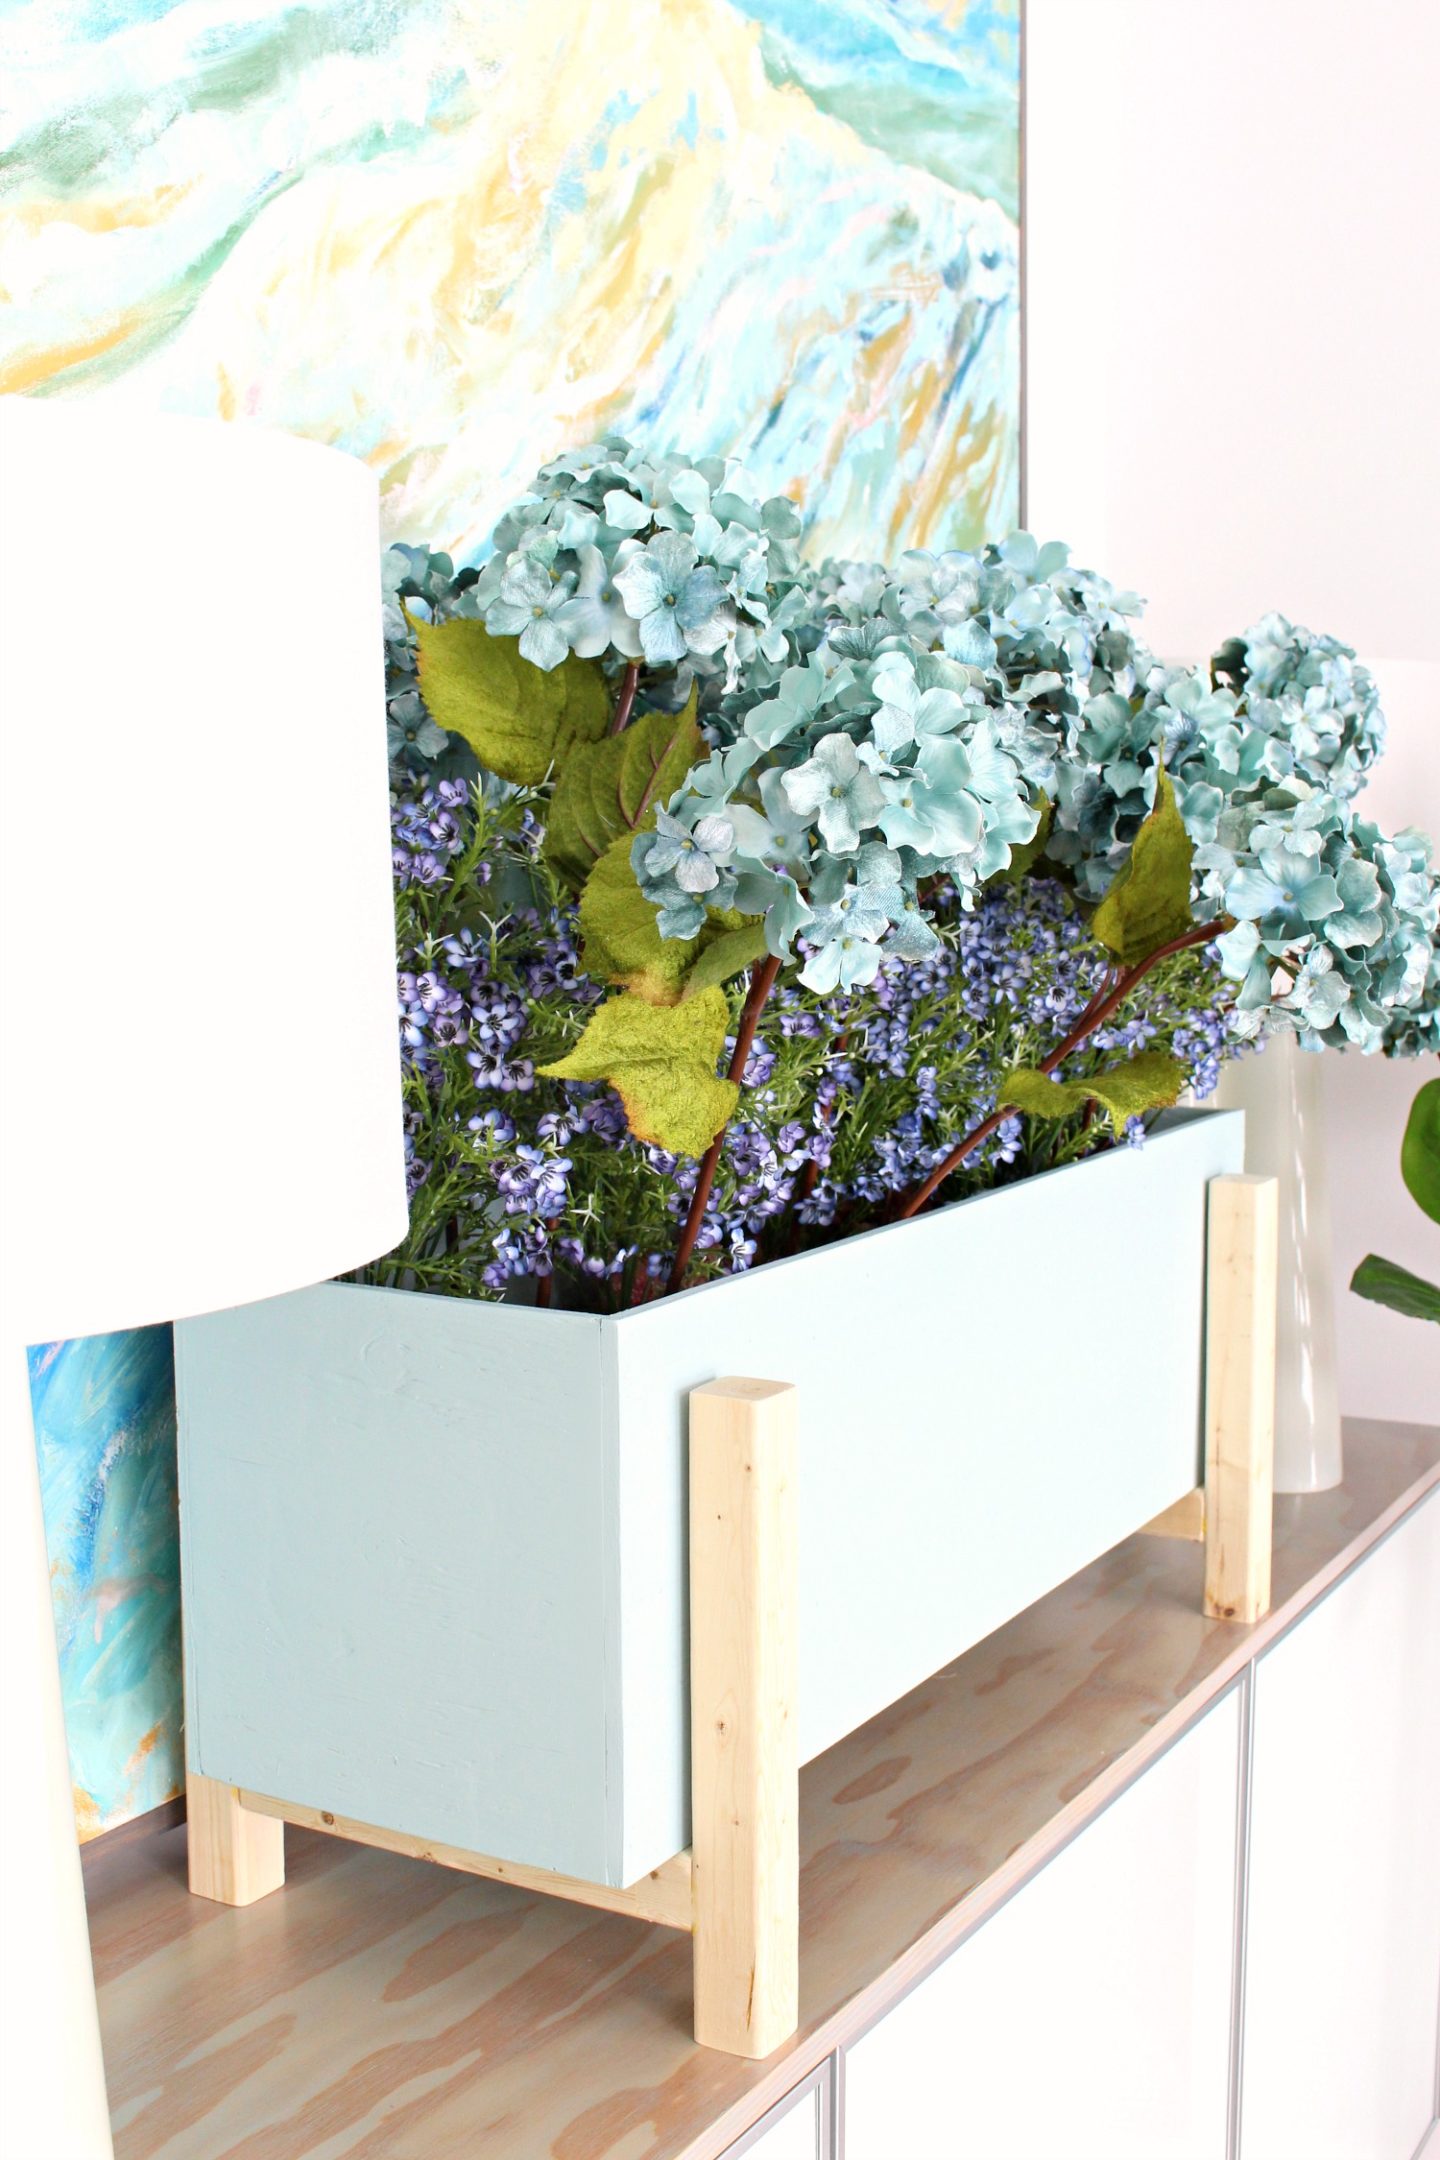 Learn How to Make This Modern DIY Planter Box for Faux Plants with Leftover Plywood and Wood Scraps #diy #homedecor #diyhomedecor #woodworking #plywoodprojects #diyplanter